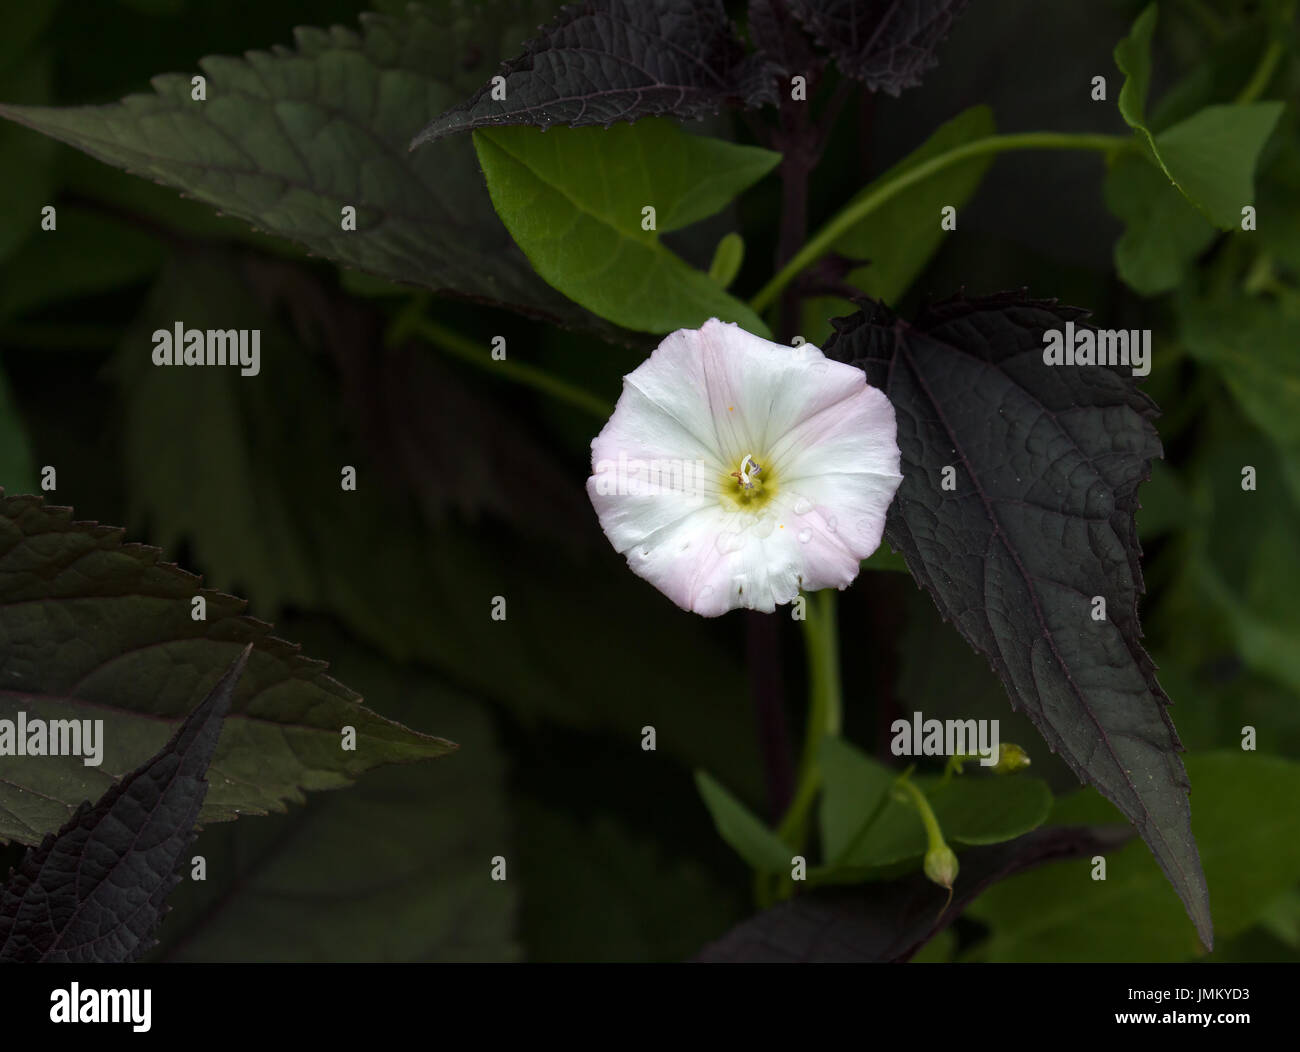 Field Bindweed flower with raindrops and foliage Stock Photo